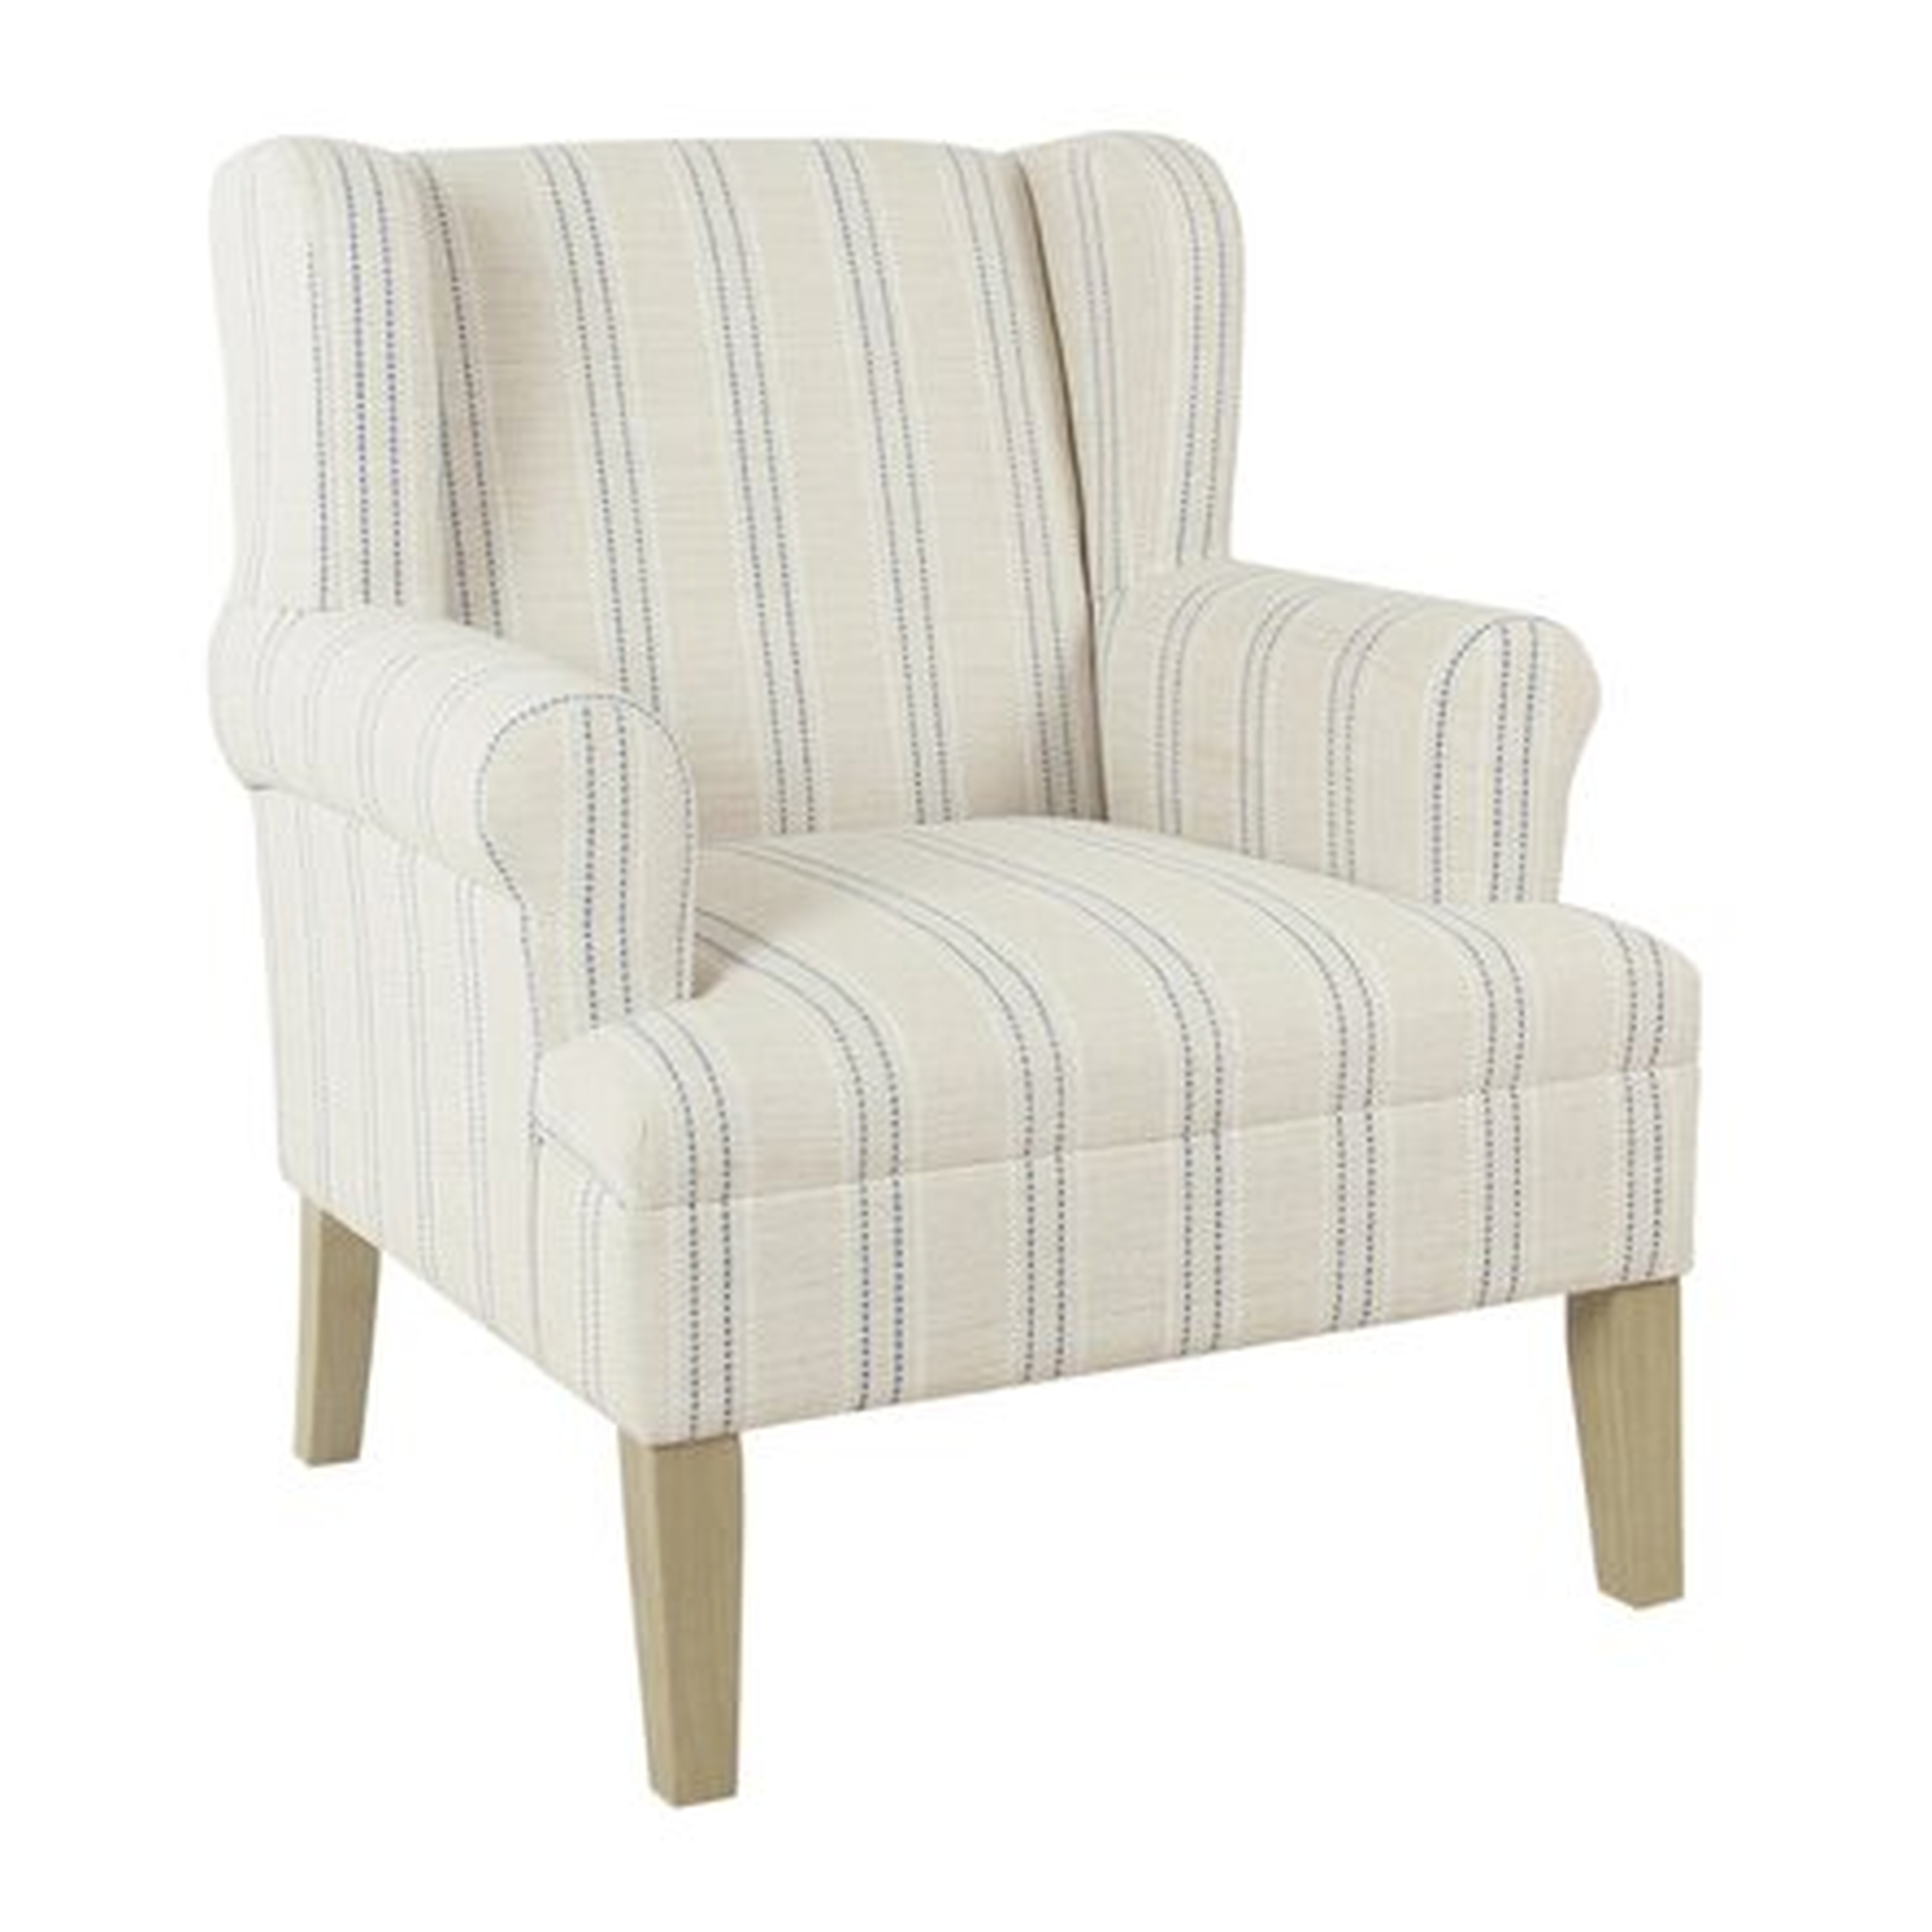 Atkinson 31.5" Wide Polyester Wingback Chair, Blue - Wayfair